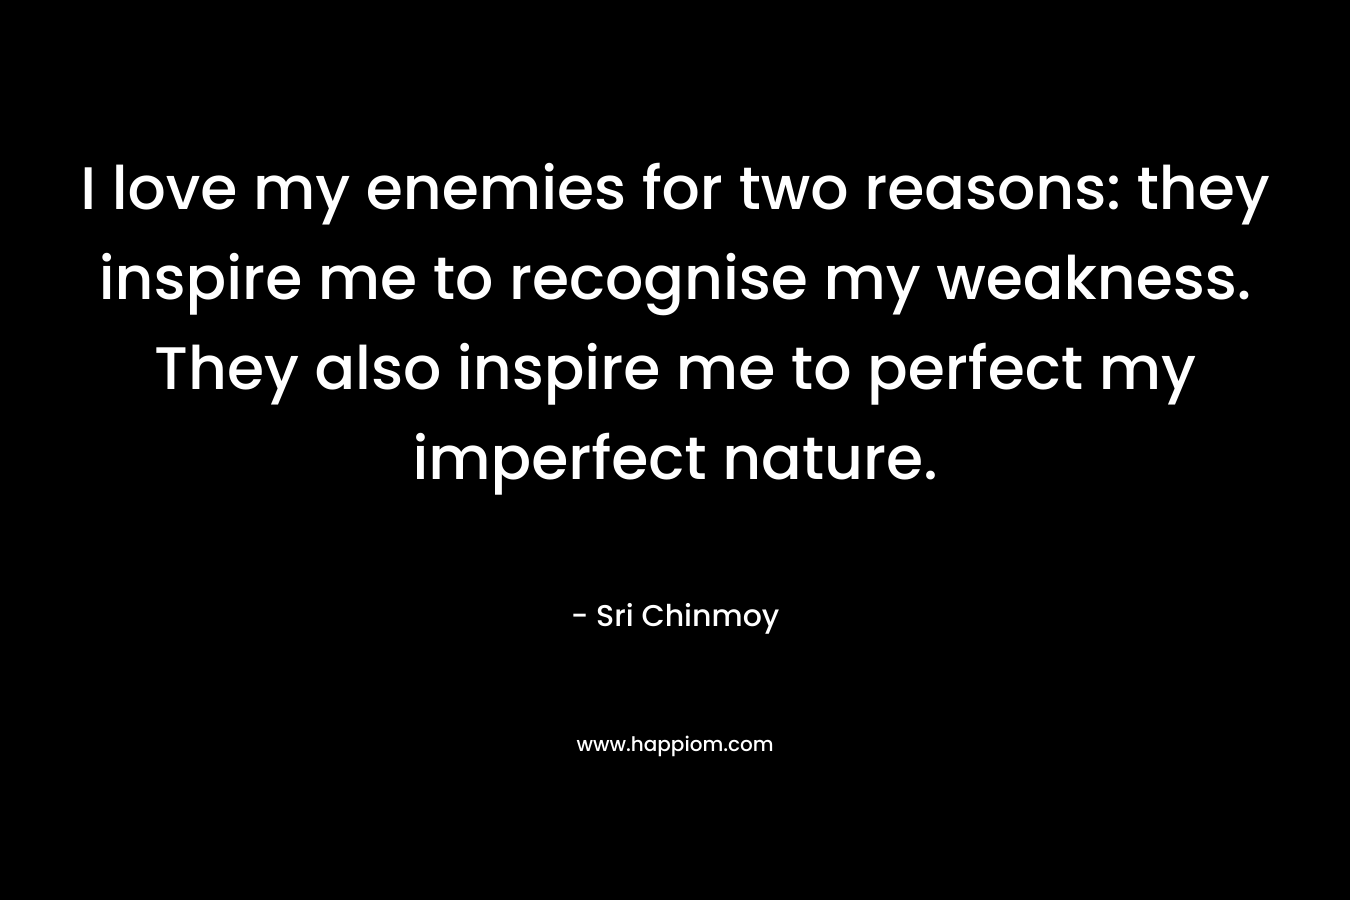 I love my enemies for two reasons: they inspire me to recognise my weakness. They also inspire me to perfect my imperfect nature.